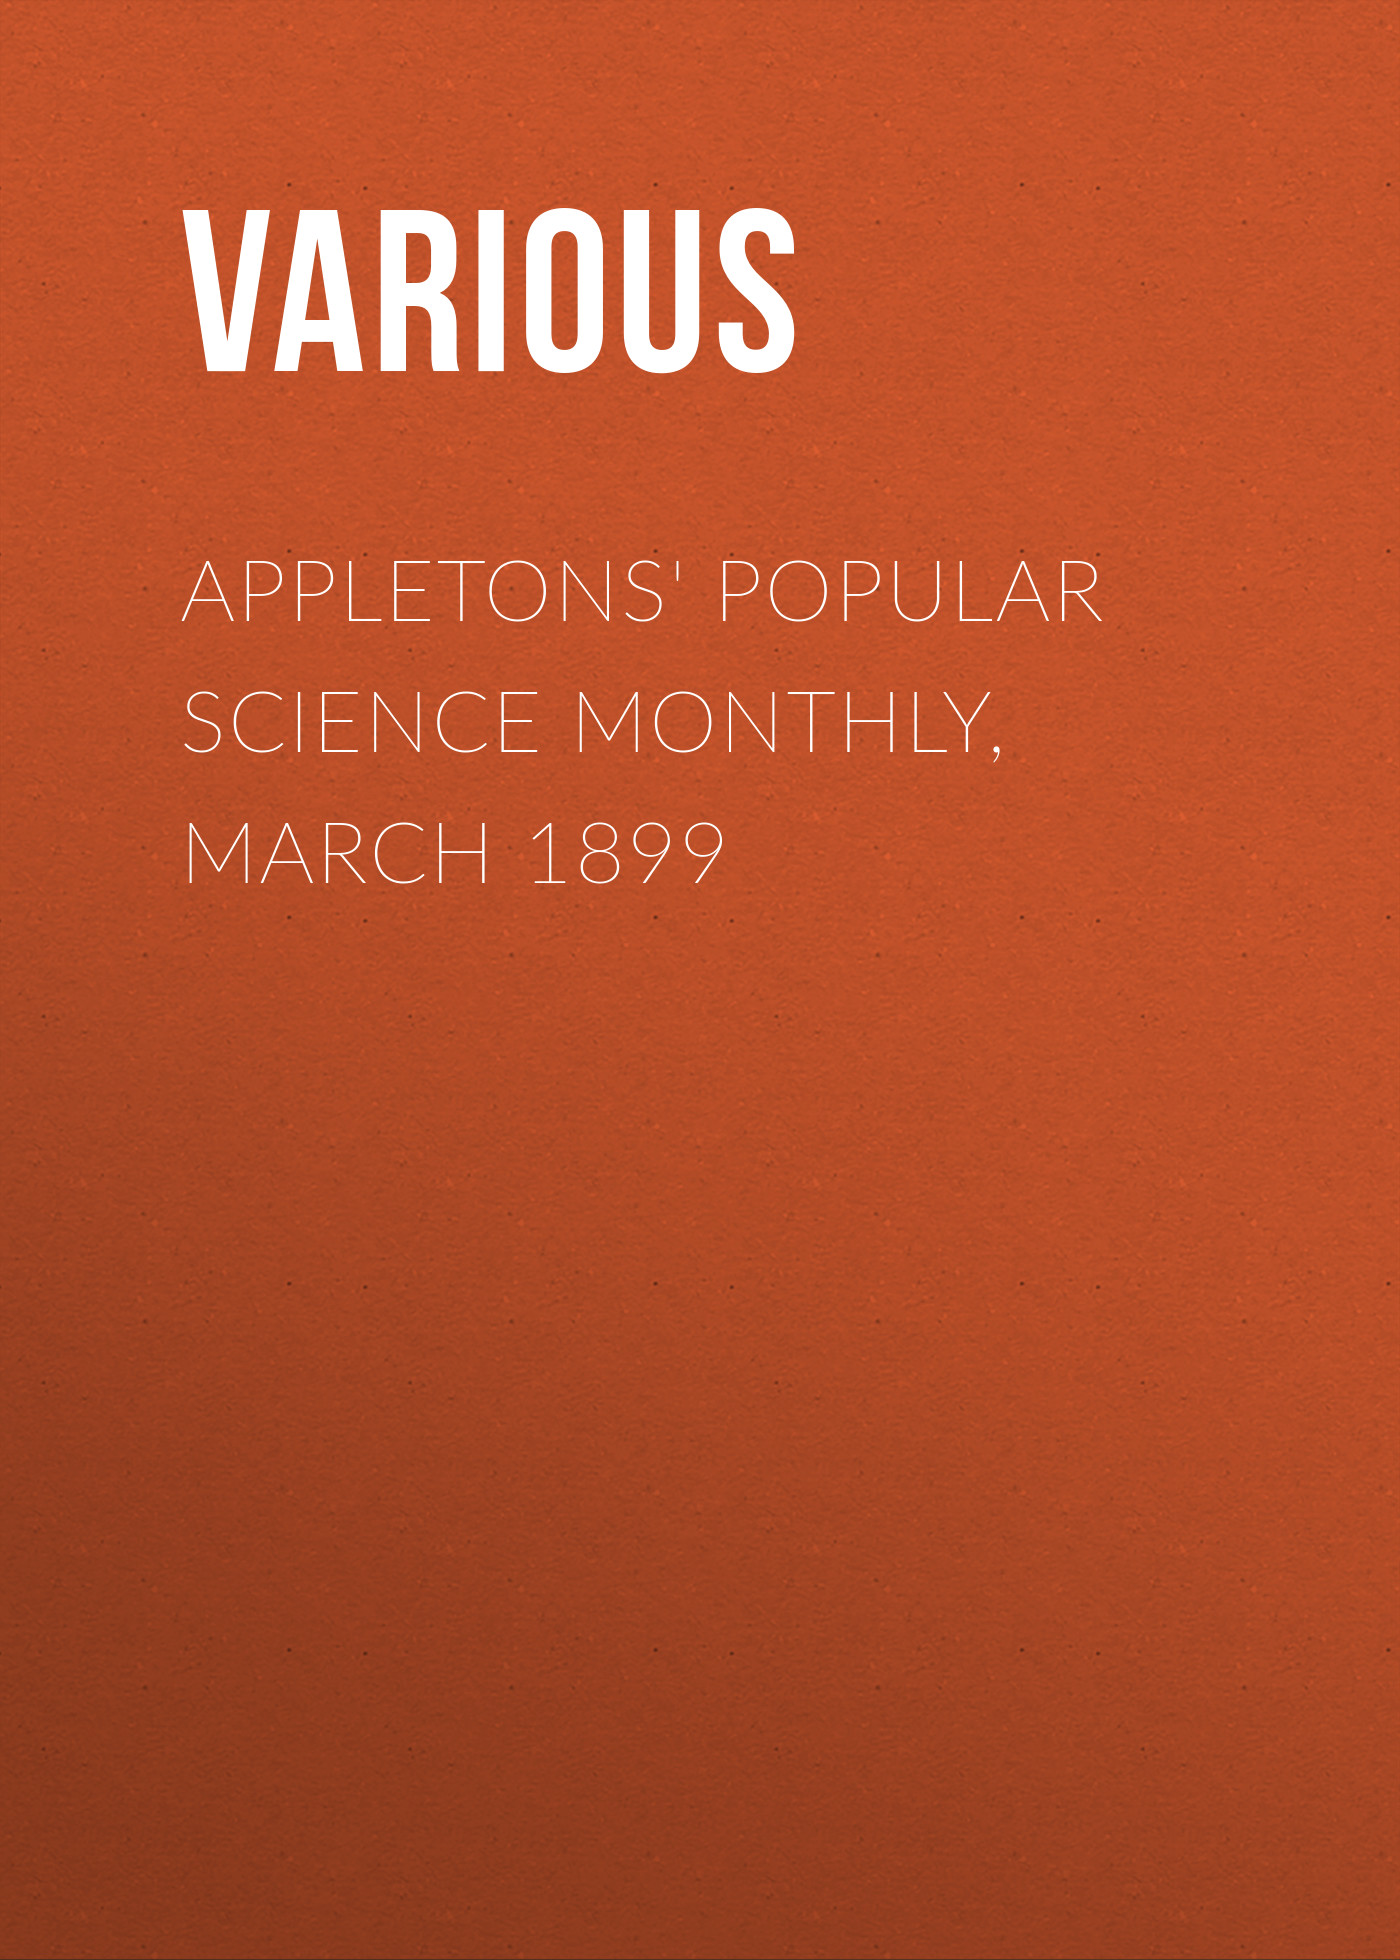 Appletons'Popular Science Monthly, March 1899